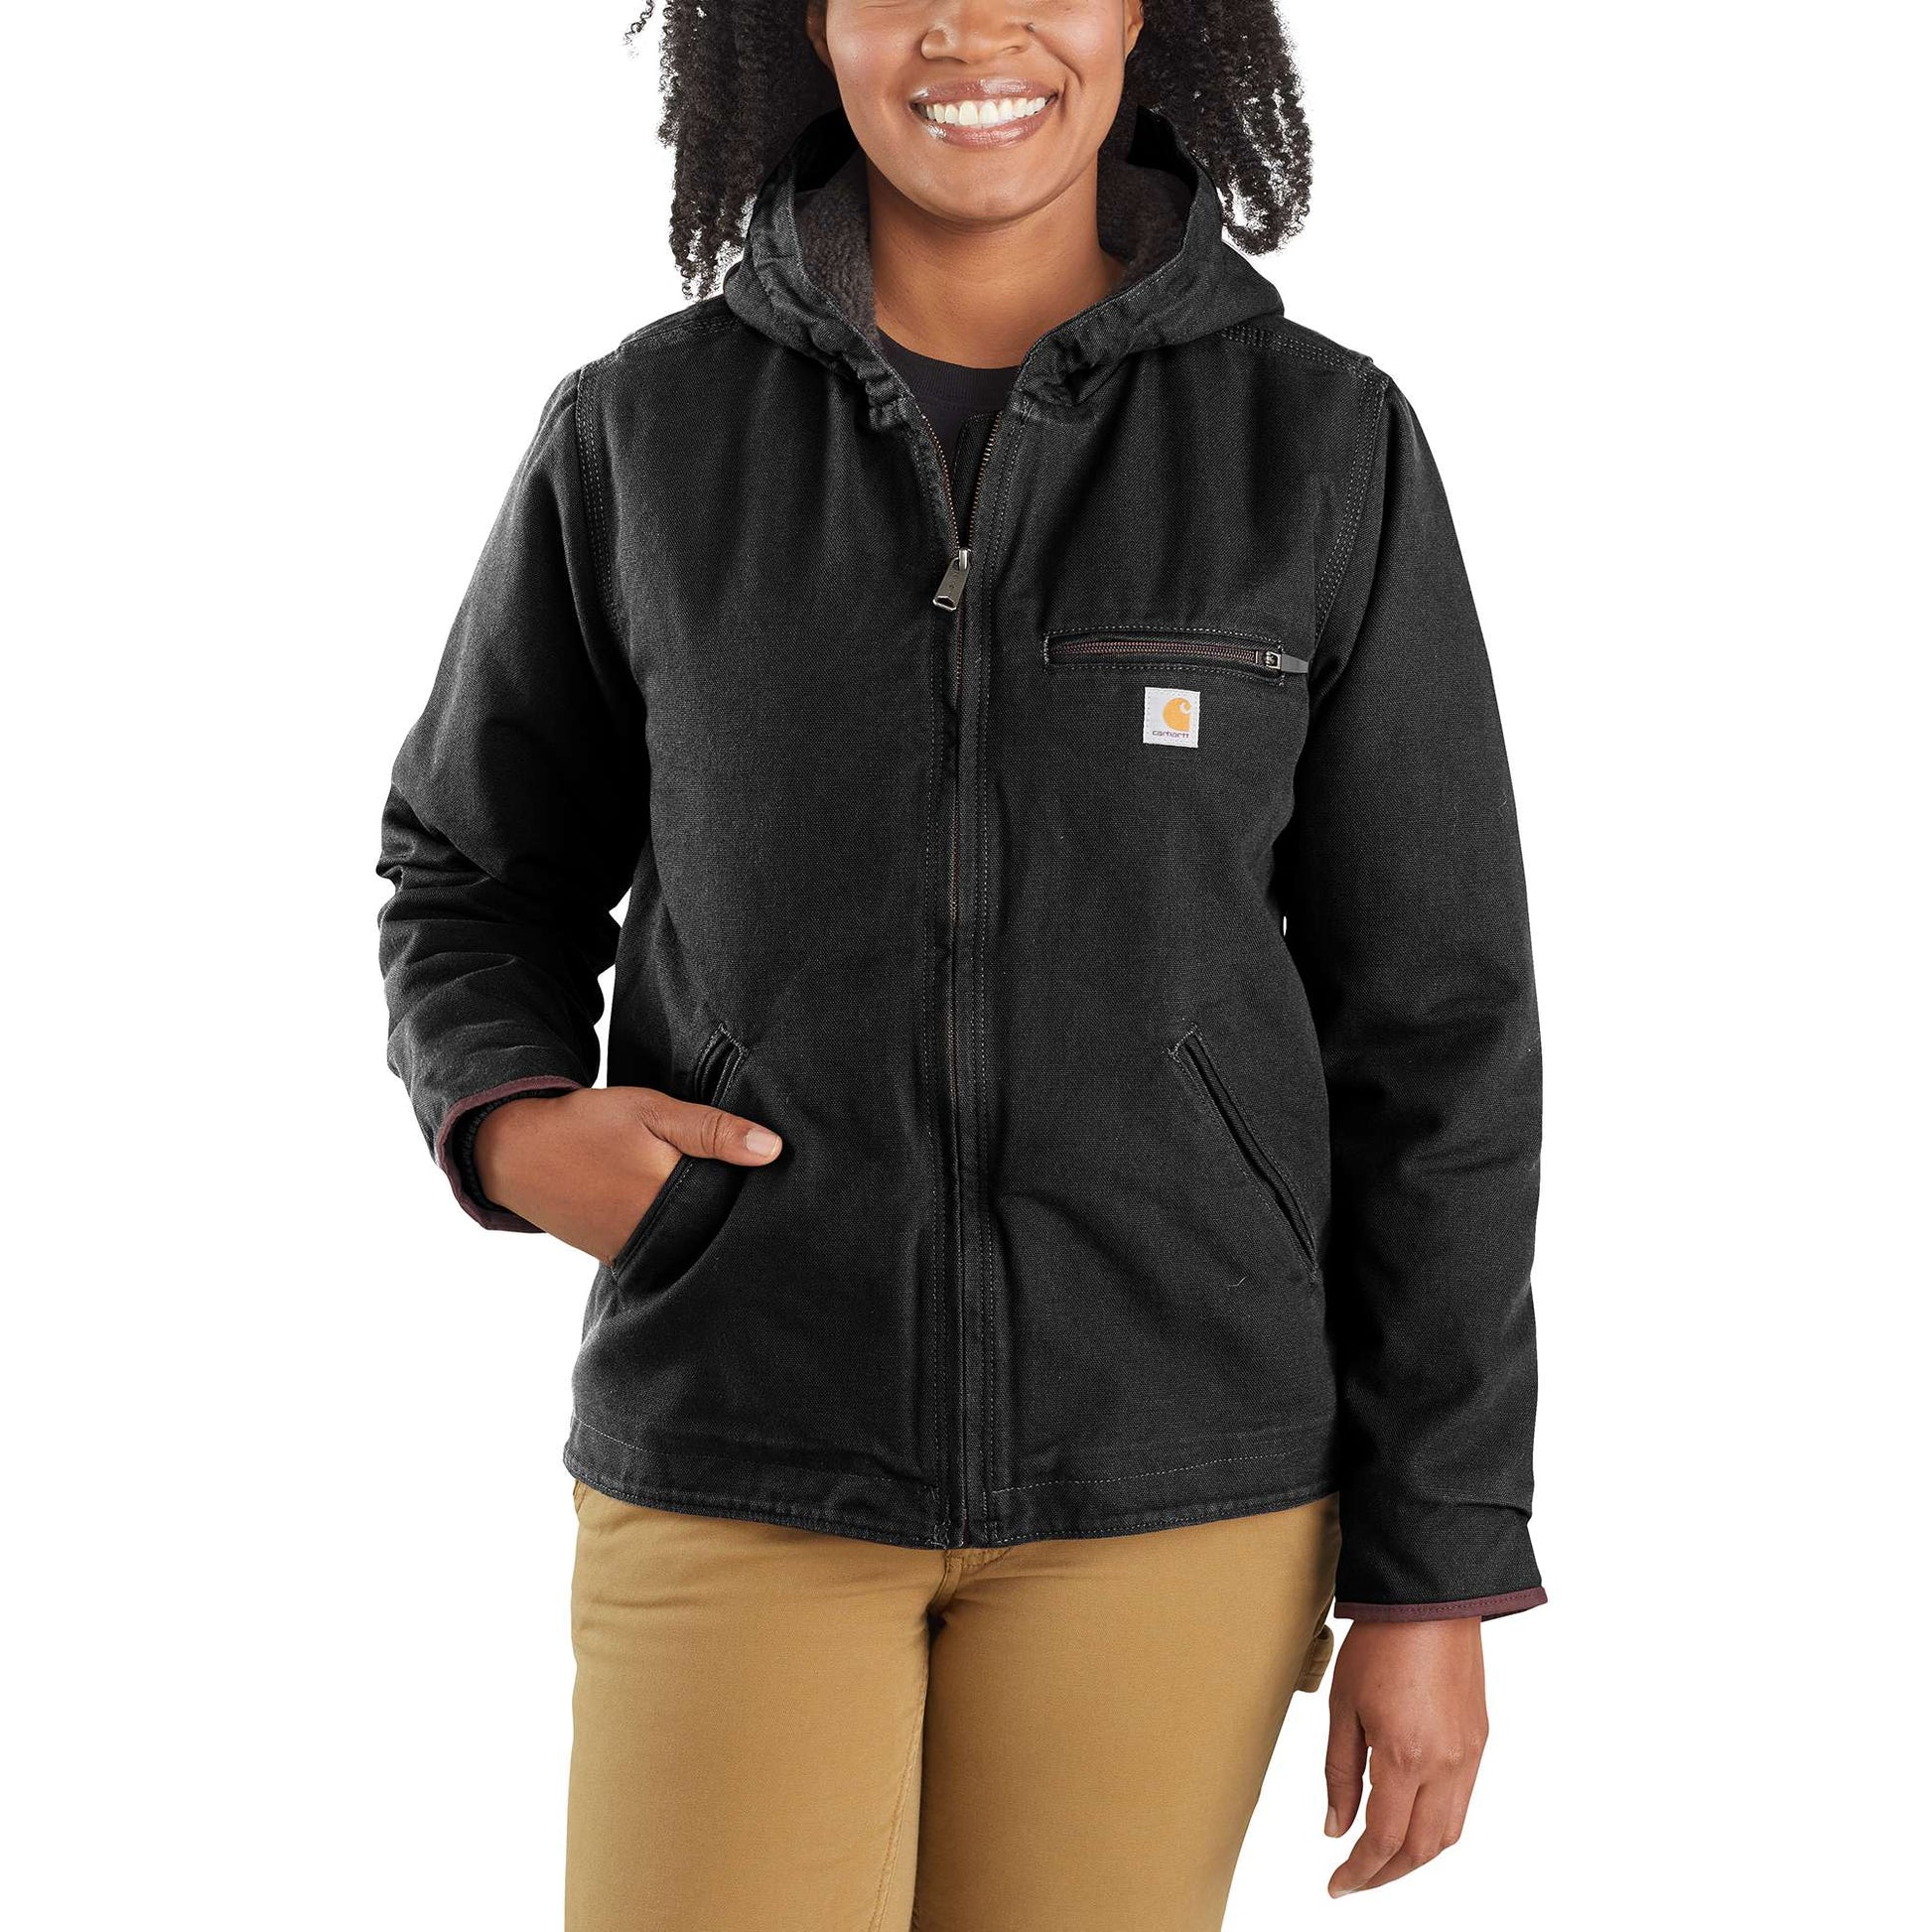 Carhartt Women's Washed Duck Active Jac, Product